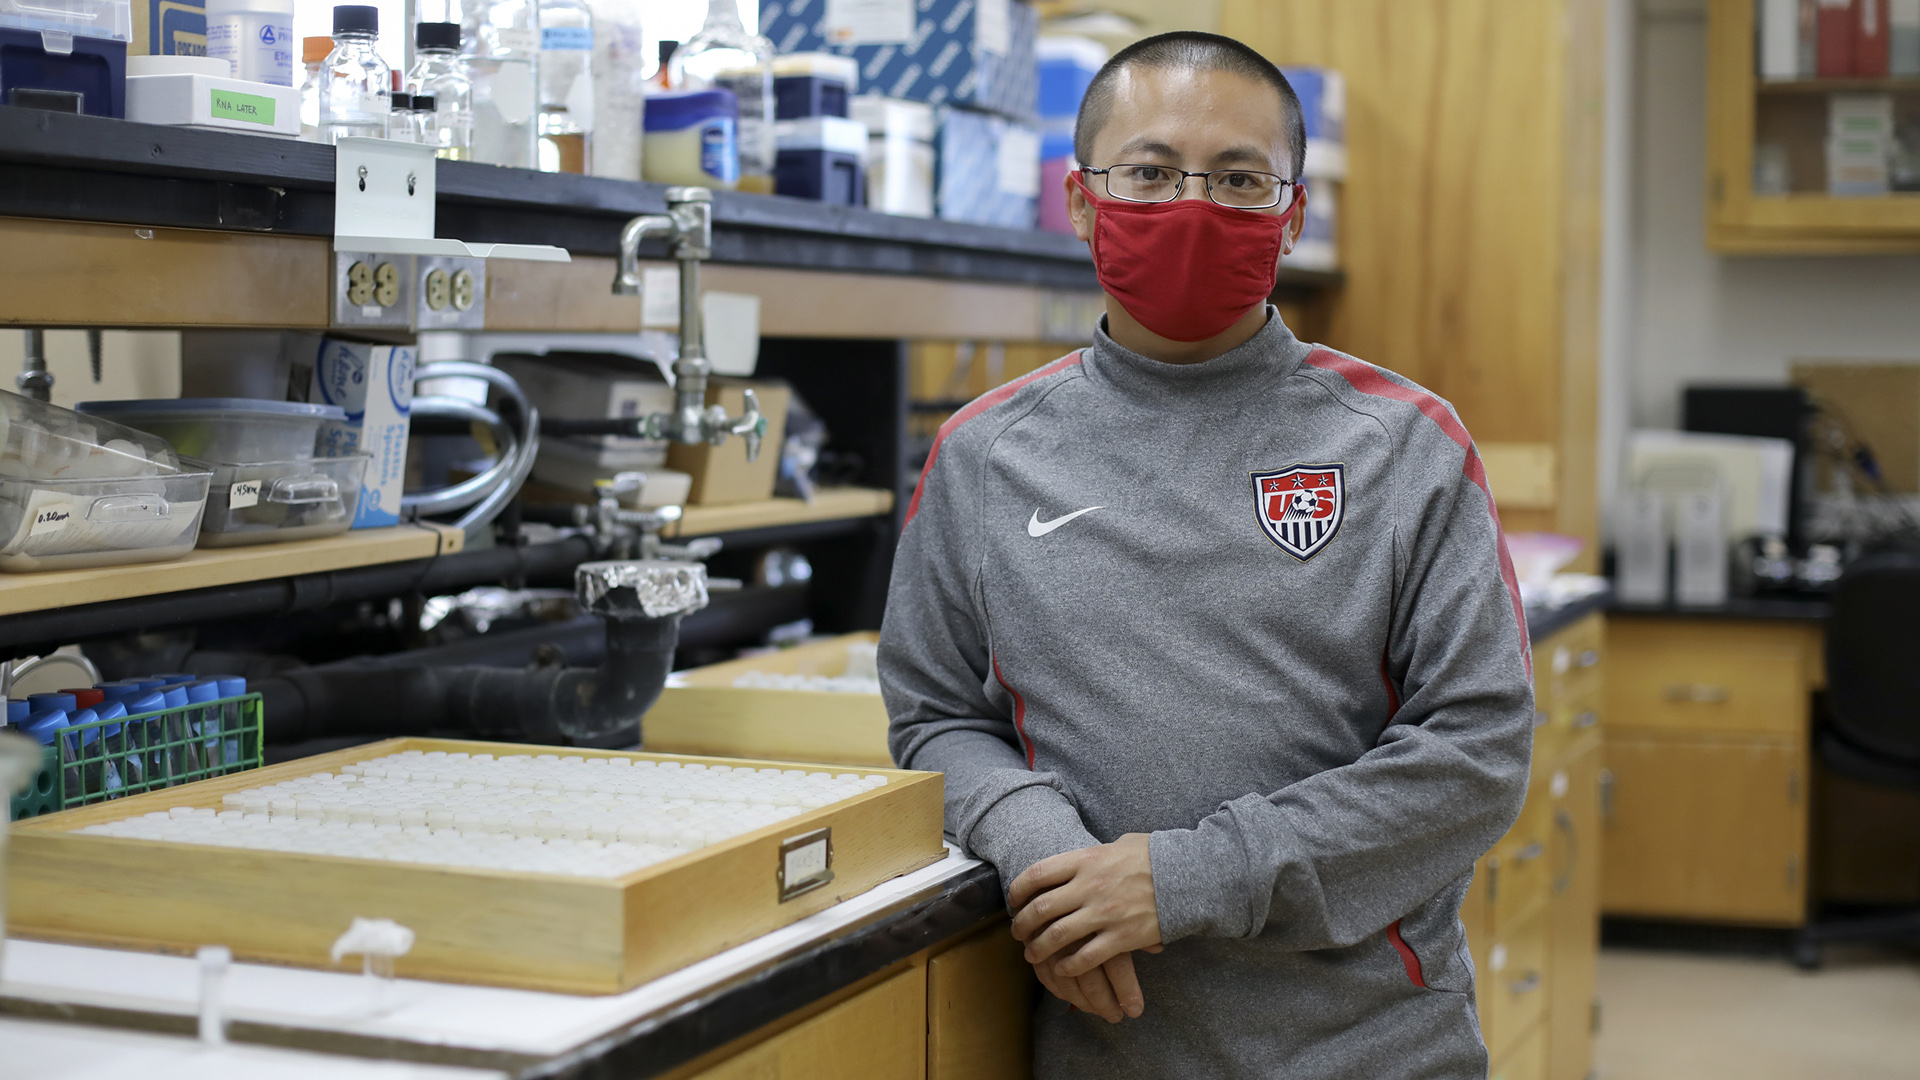 Xia Lee stands next to a bench in a laboratory.